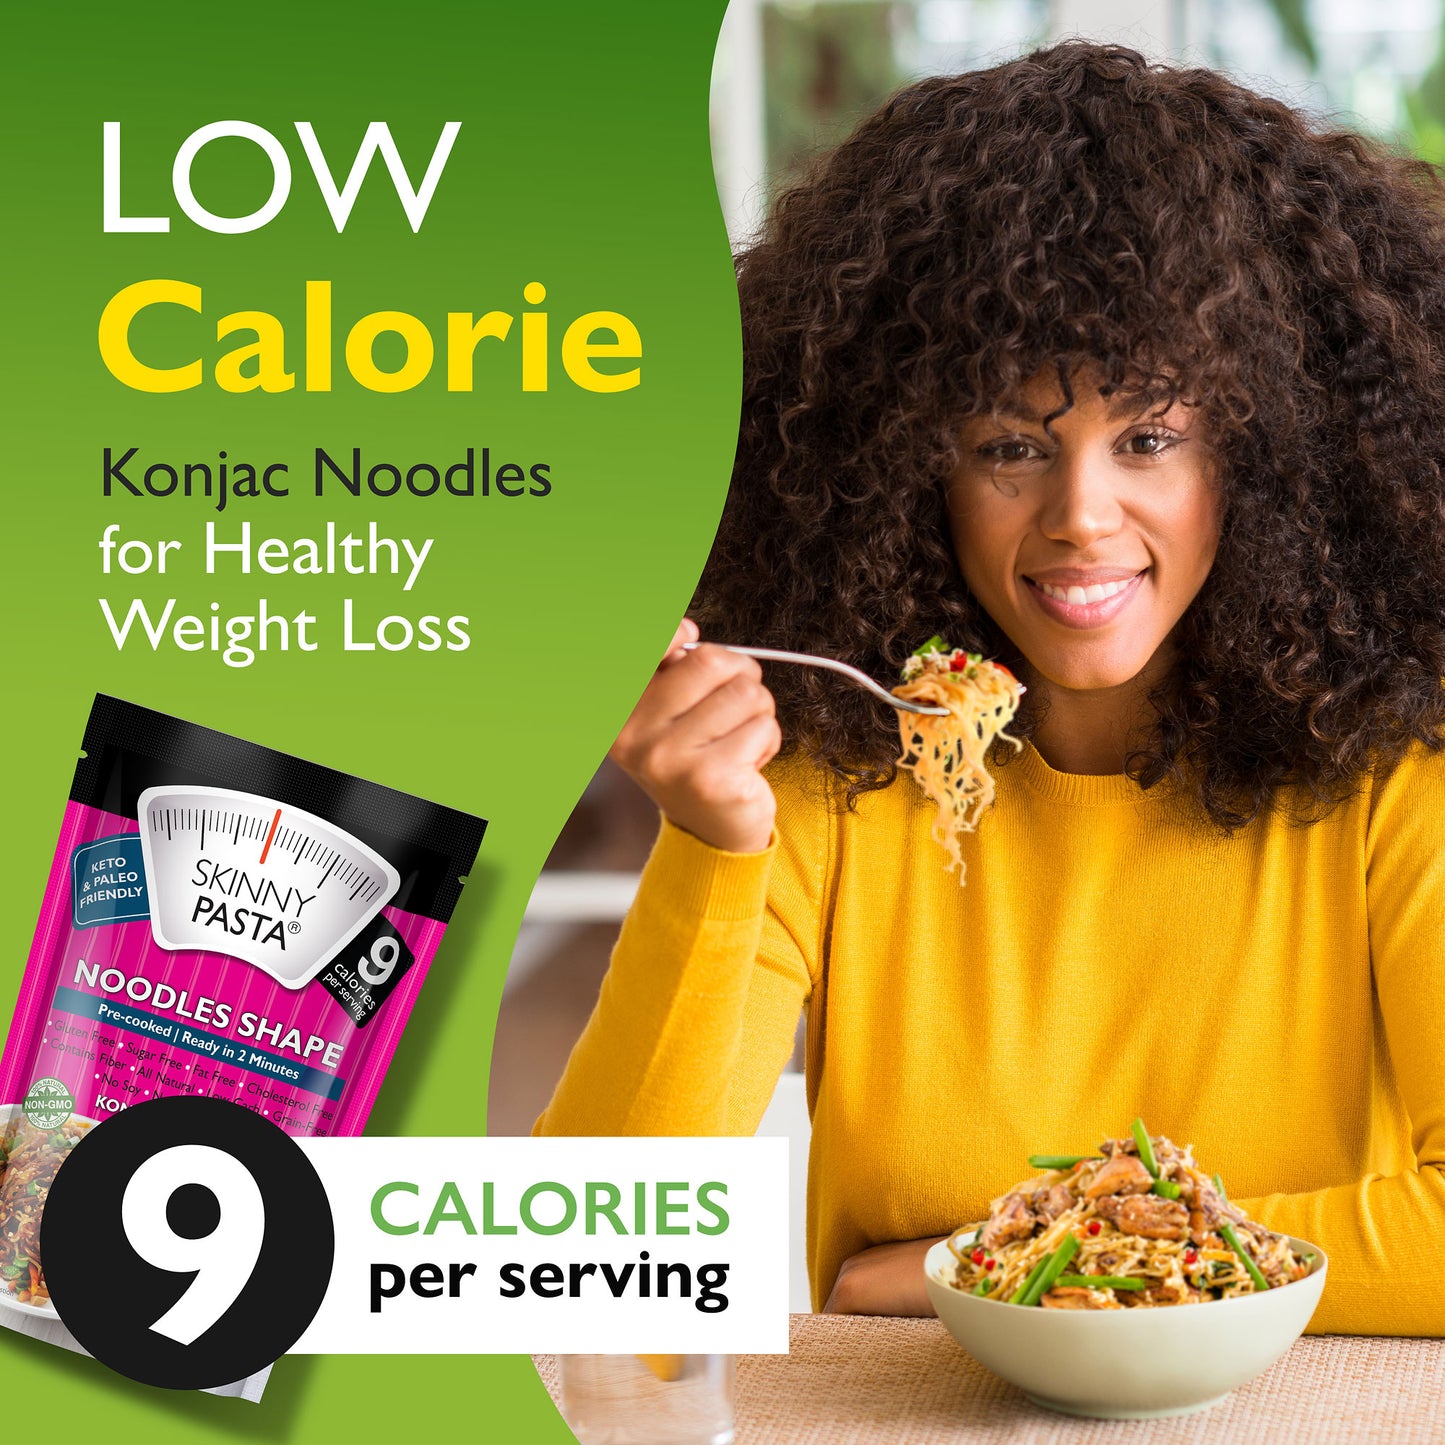 Skinny Pasta 9.52 oz - The Only Odor Free 100% Konjac Noodle -  Low Calorie Food - Noodles